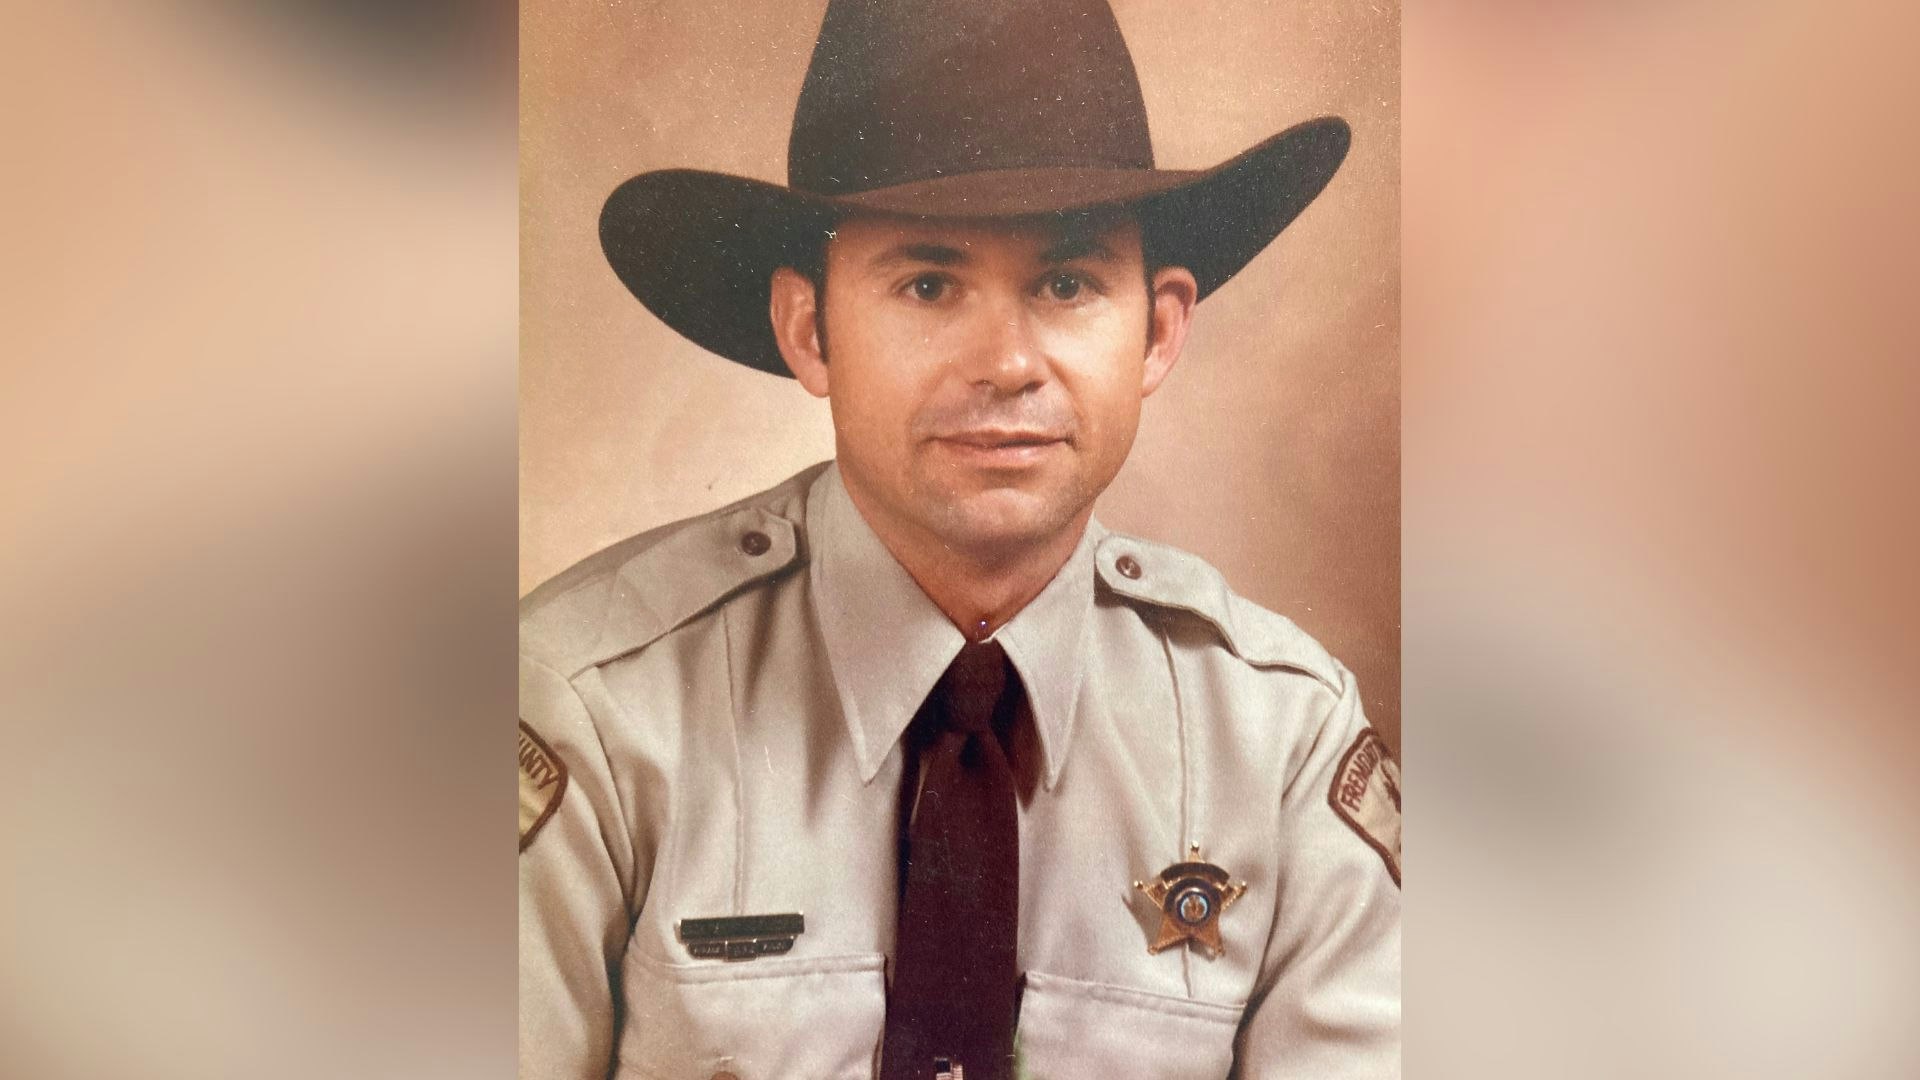 Skip Hornecker at the beginning of his law enforcement career in 1984.